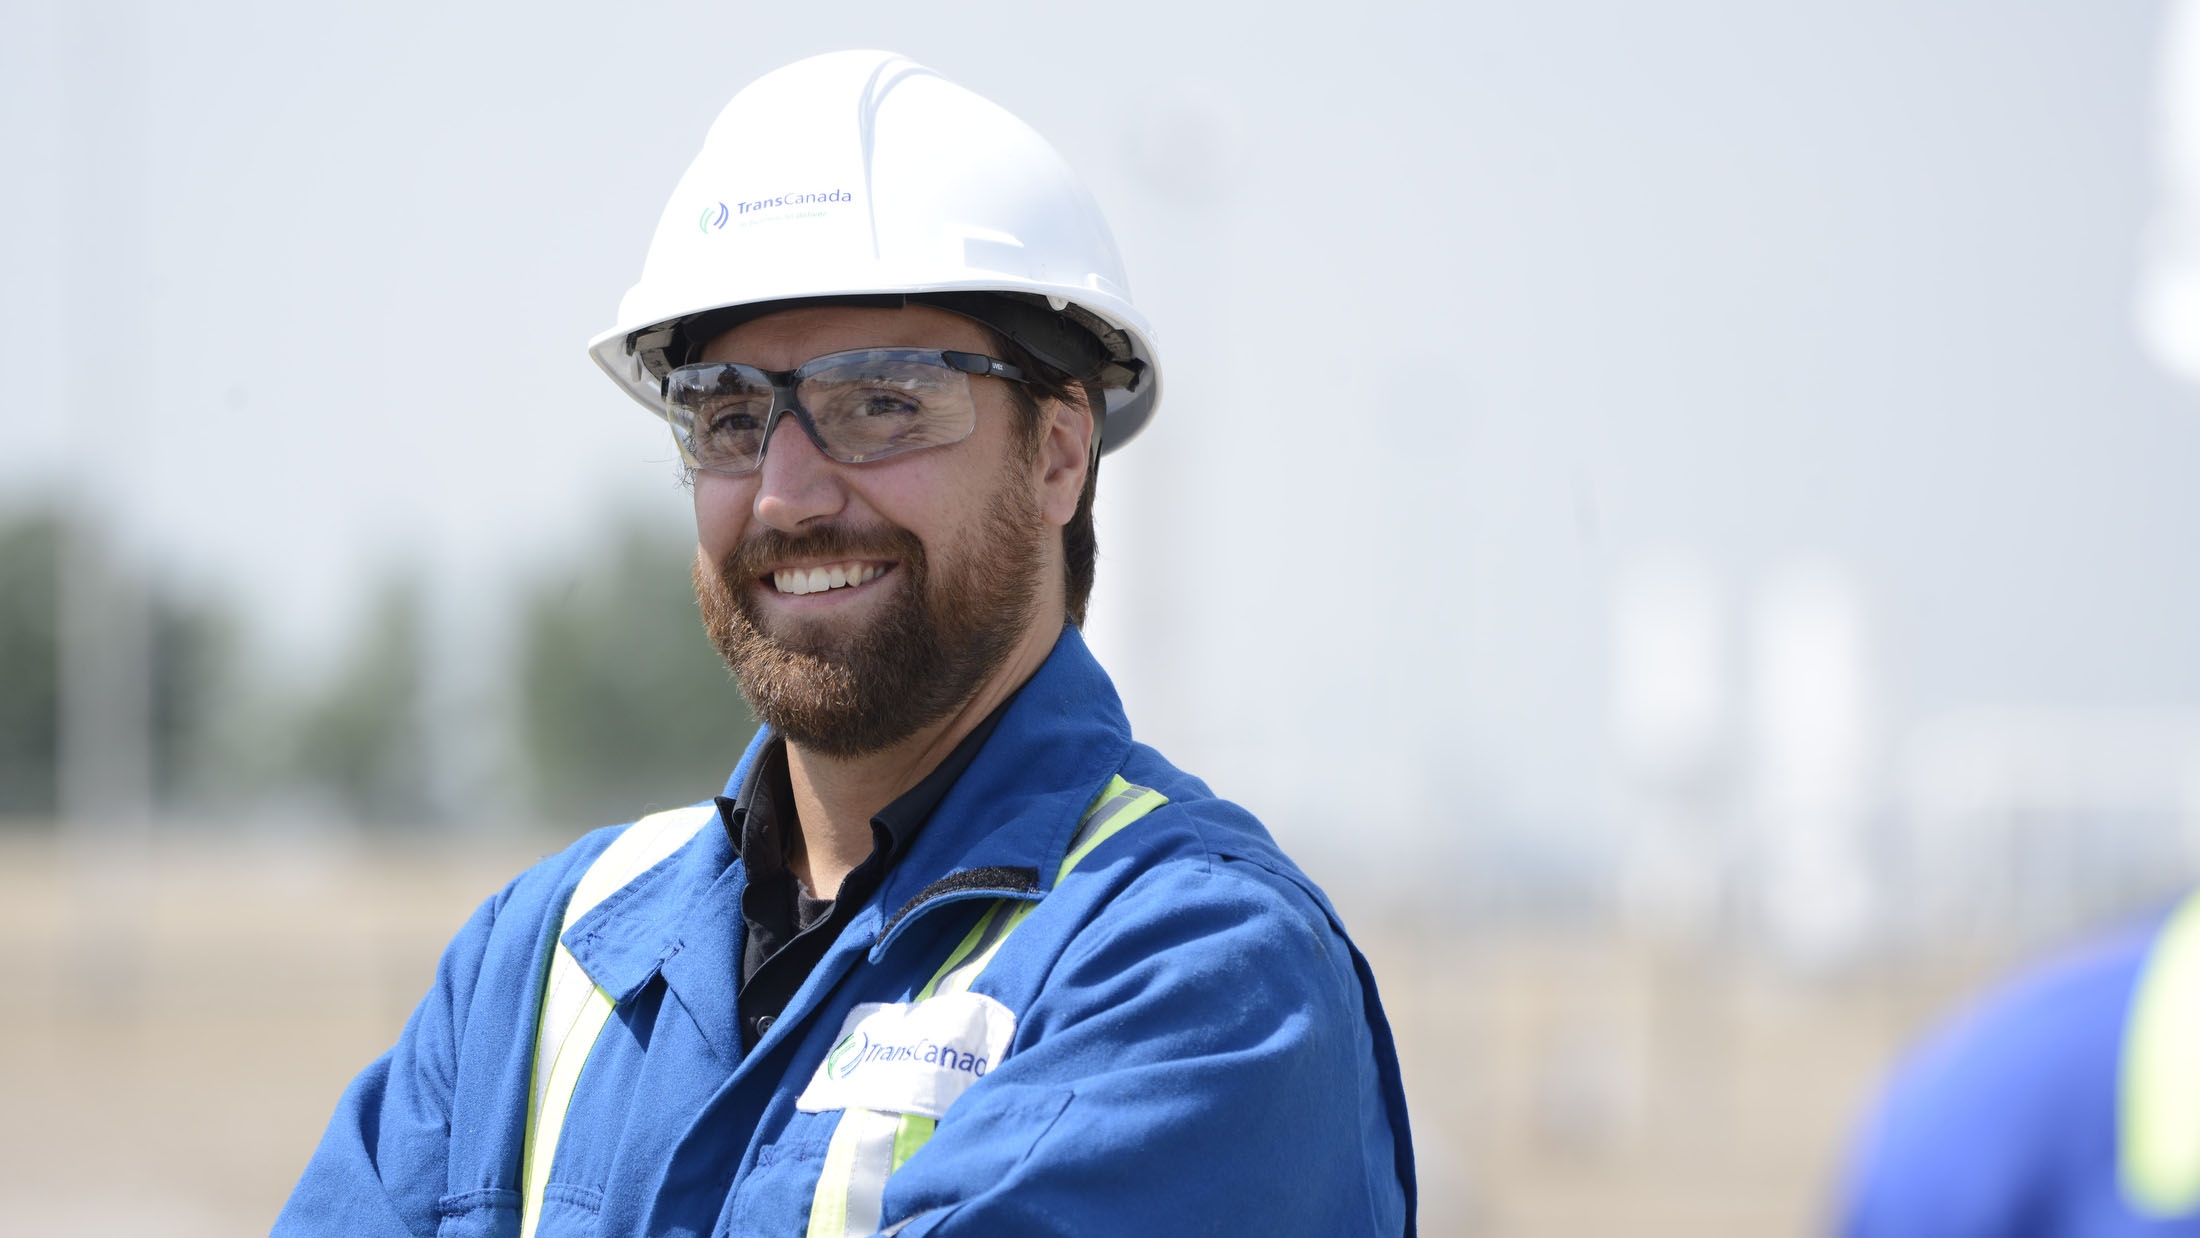 TransCanada engineer Aaron Schartner has been involved in the record setting journey since its inception